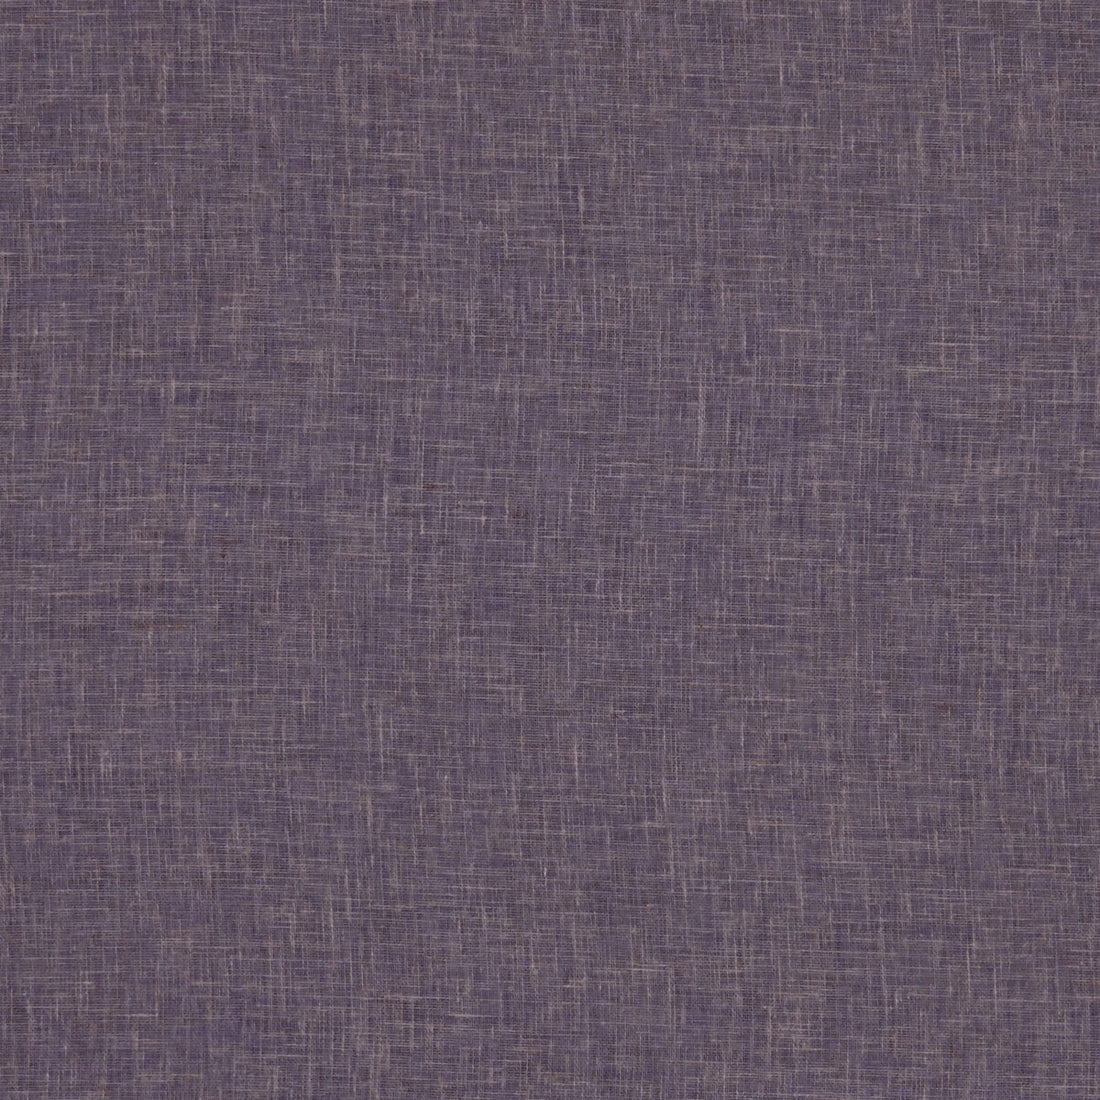 Midori fabric in heather color - pattern F1068/19.CAC.0 - by Clarke And Clarke in the Clarke &amp; Clarke Midori collection